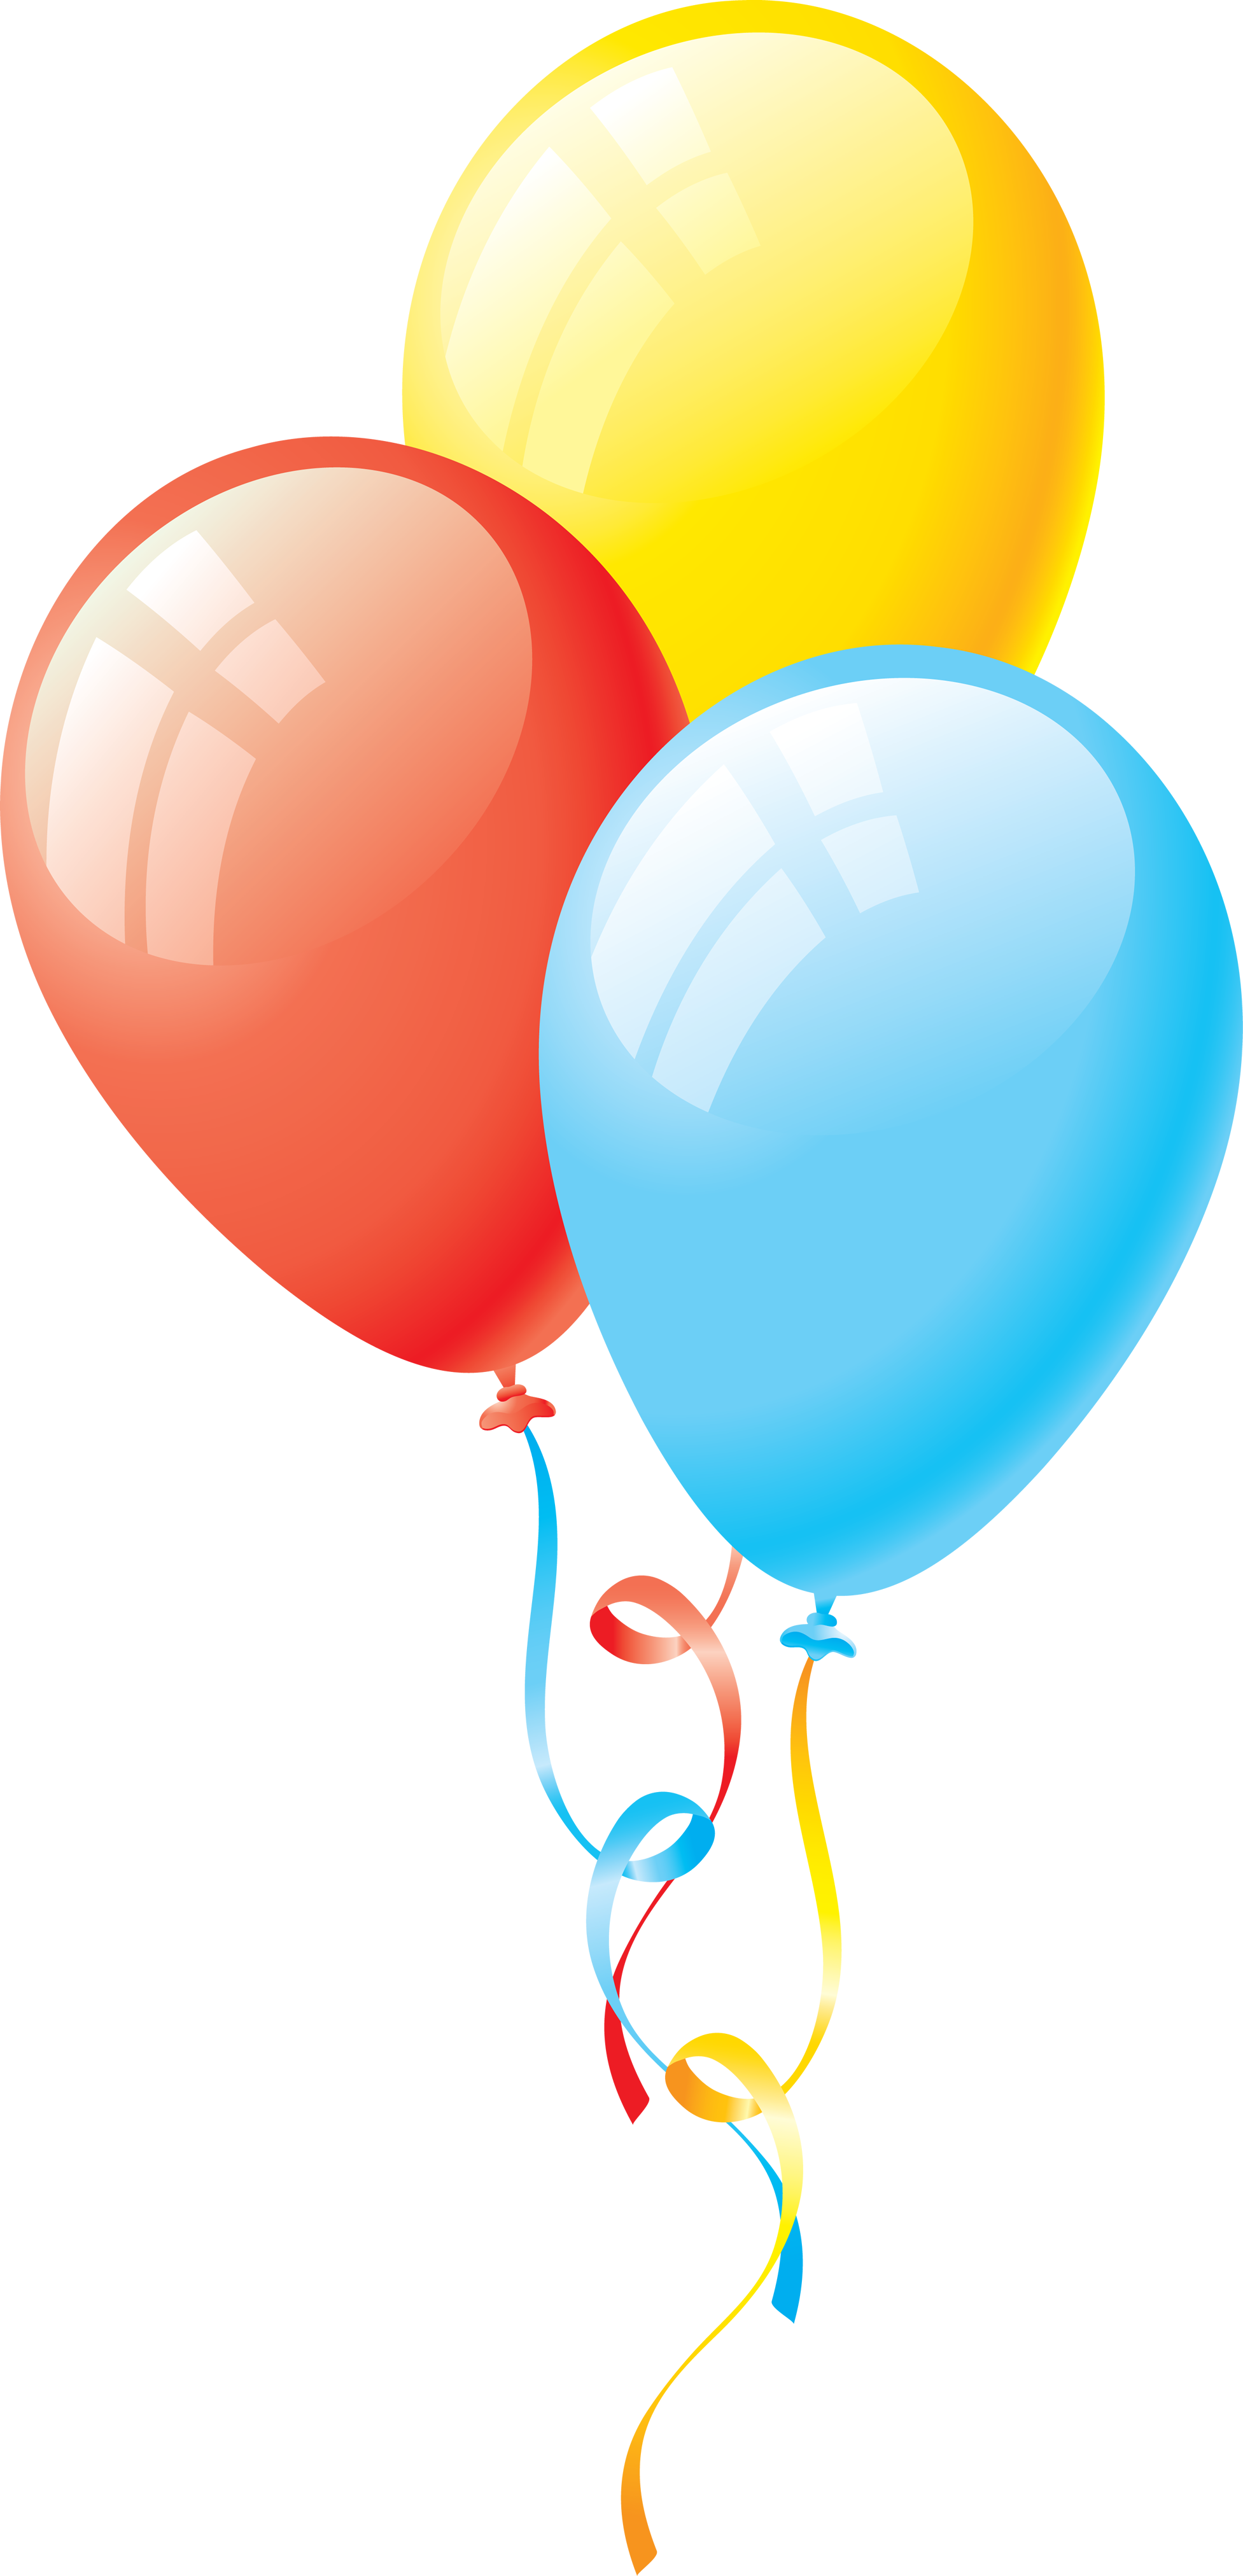 Balloons Png 5 Png Image - Balloon, Transparent background PNG HD thumbnail